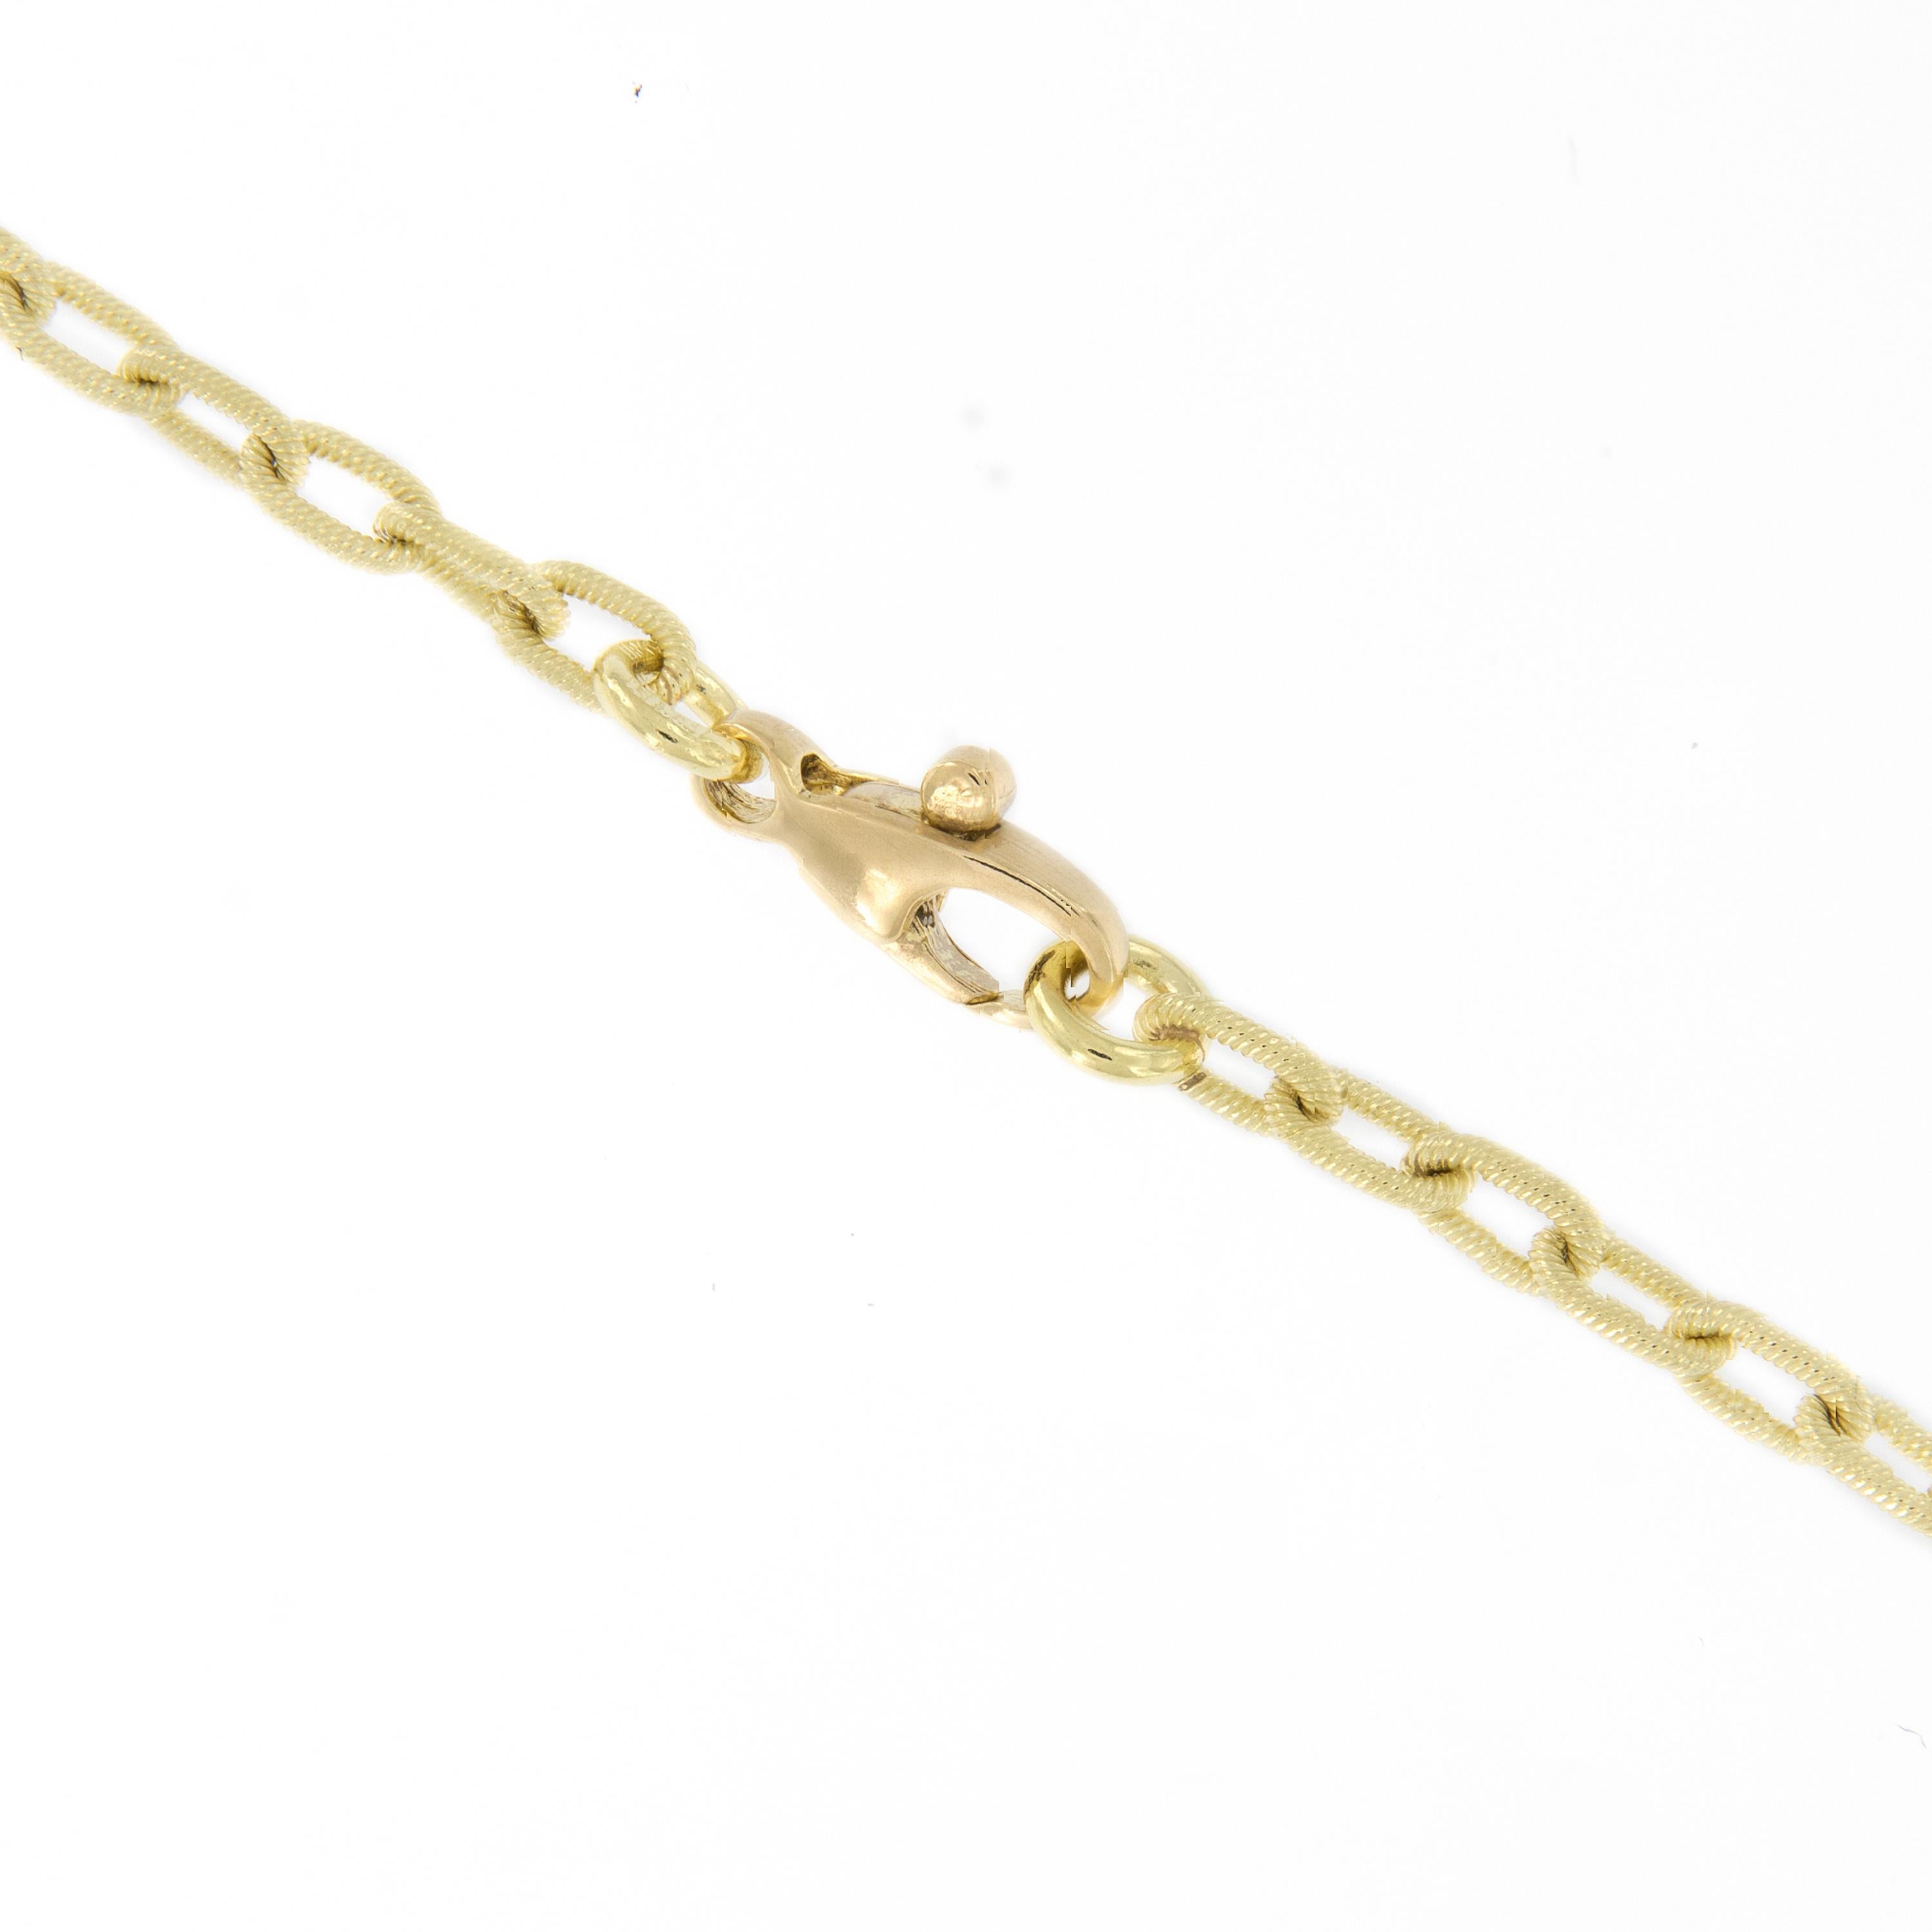 Beautiful handcrafted Italian 18k gold ribbed oval link chain necklace with a lobster clasp. The 18 inch long necklace shimmers on the skin from the soft color & craftsmanship executed on the ribbed finish. Complimentary signature wrapping &